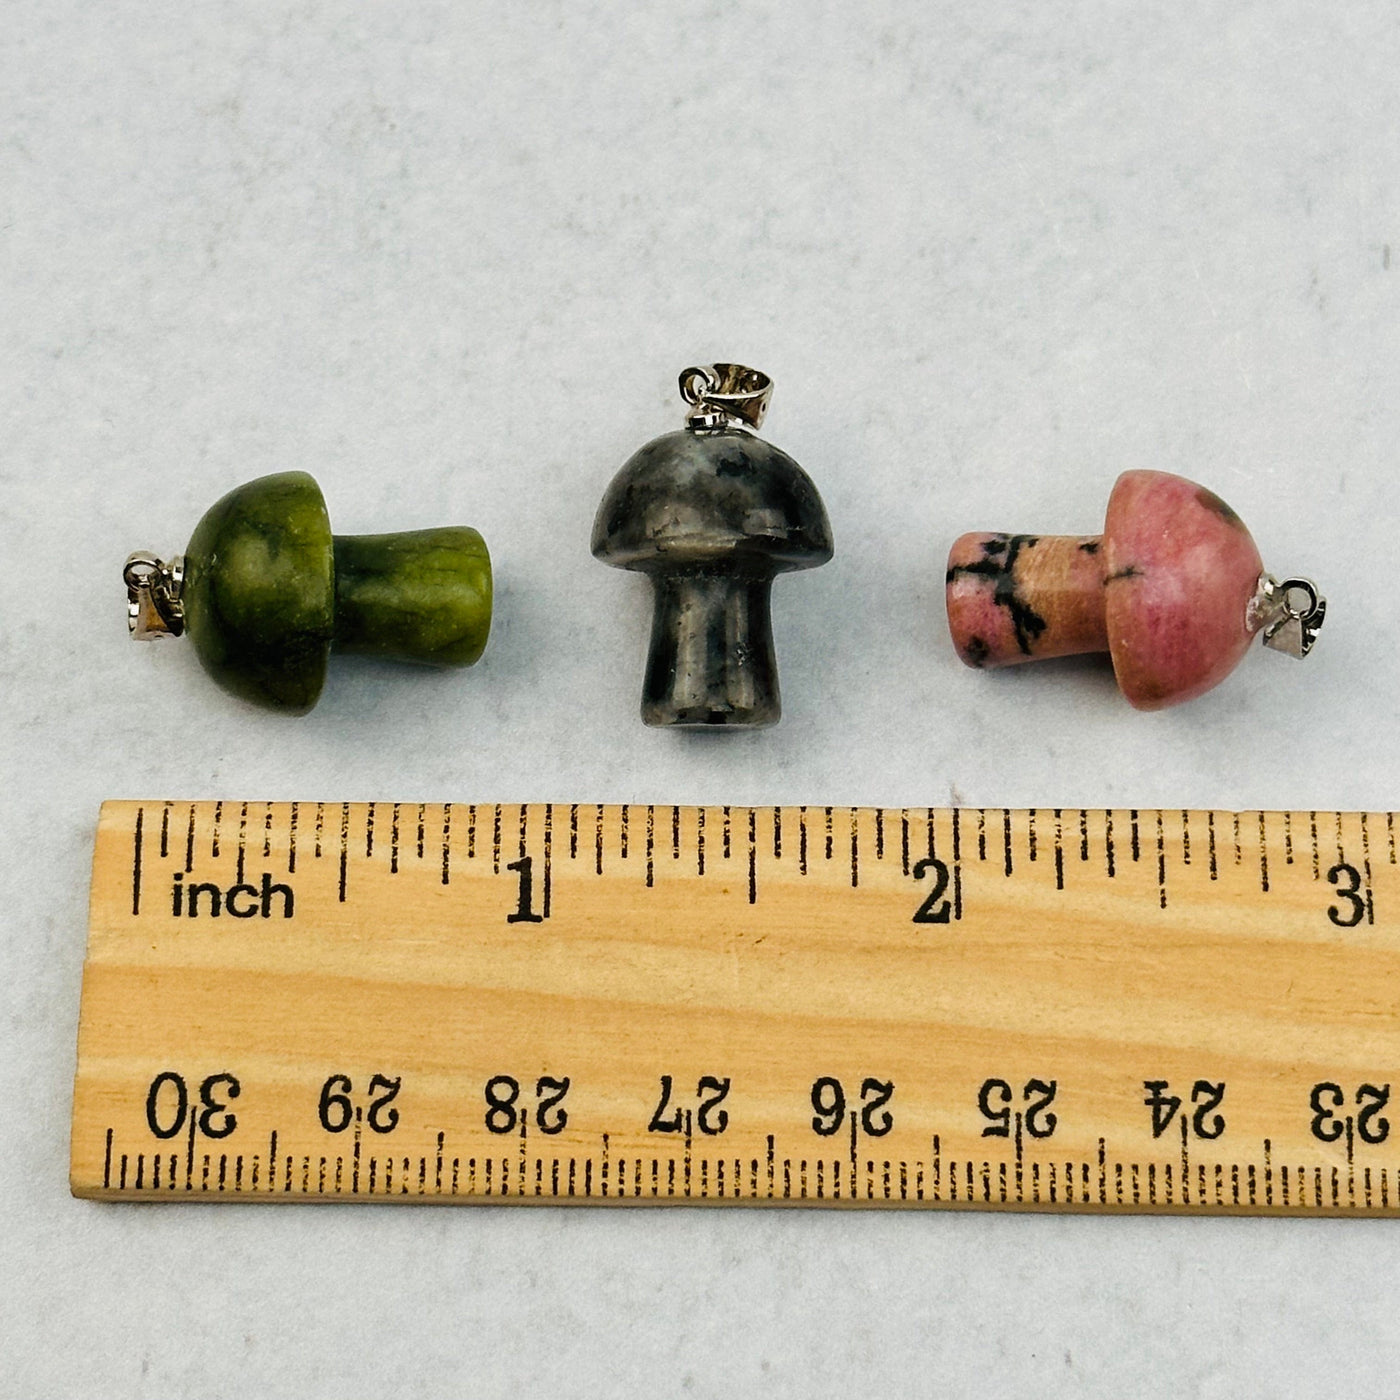 mushroom pendants next to a ruler for size reference 